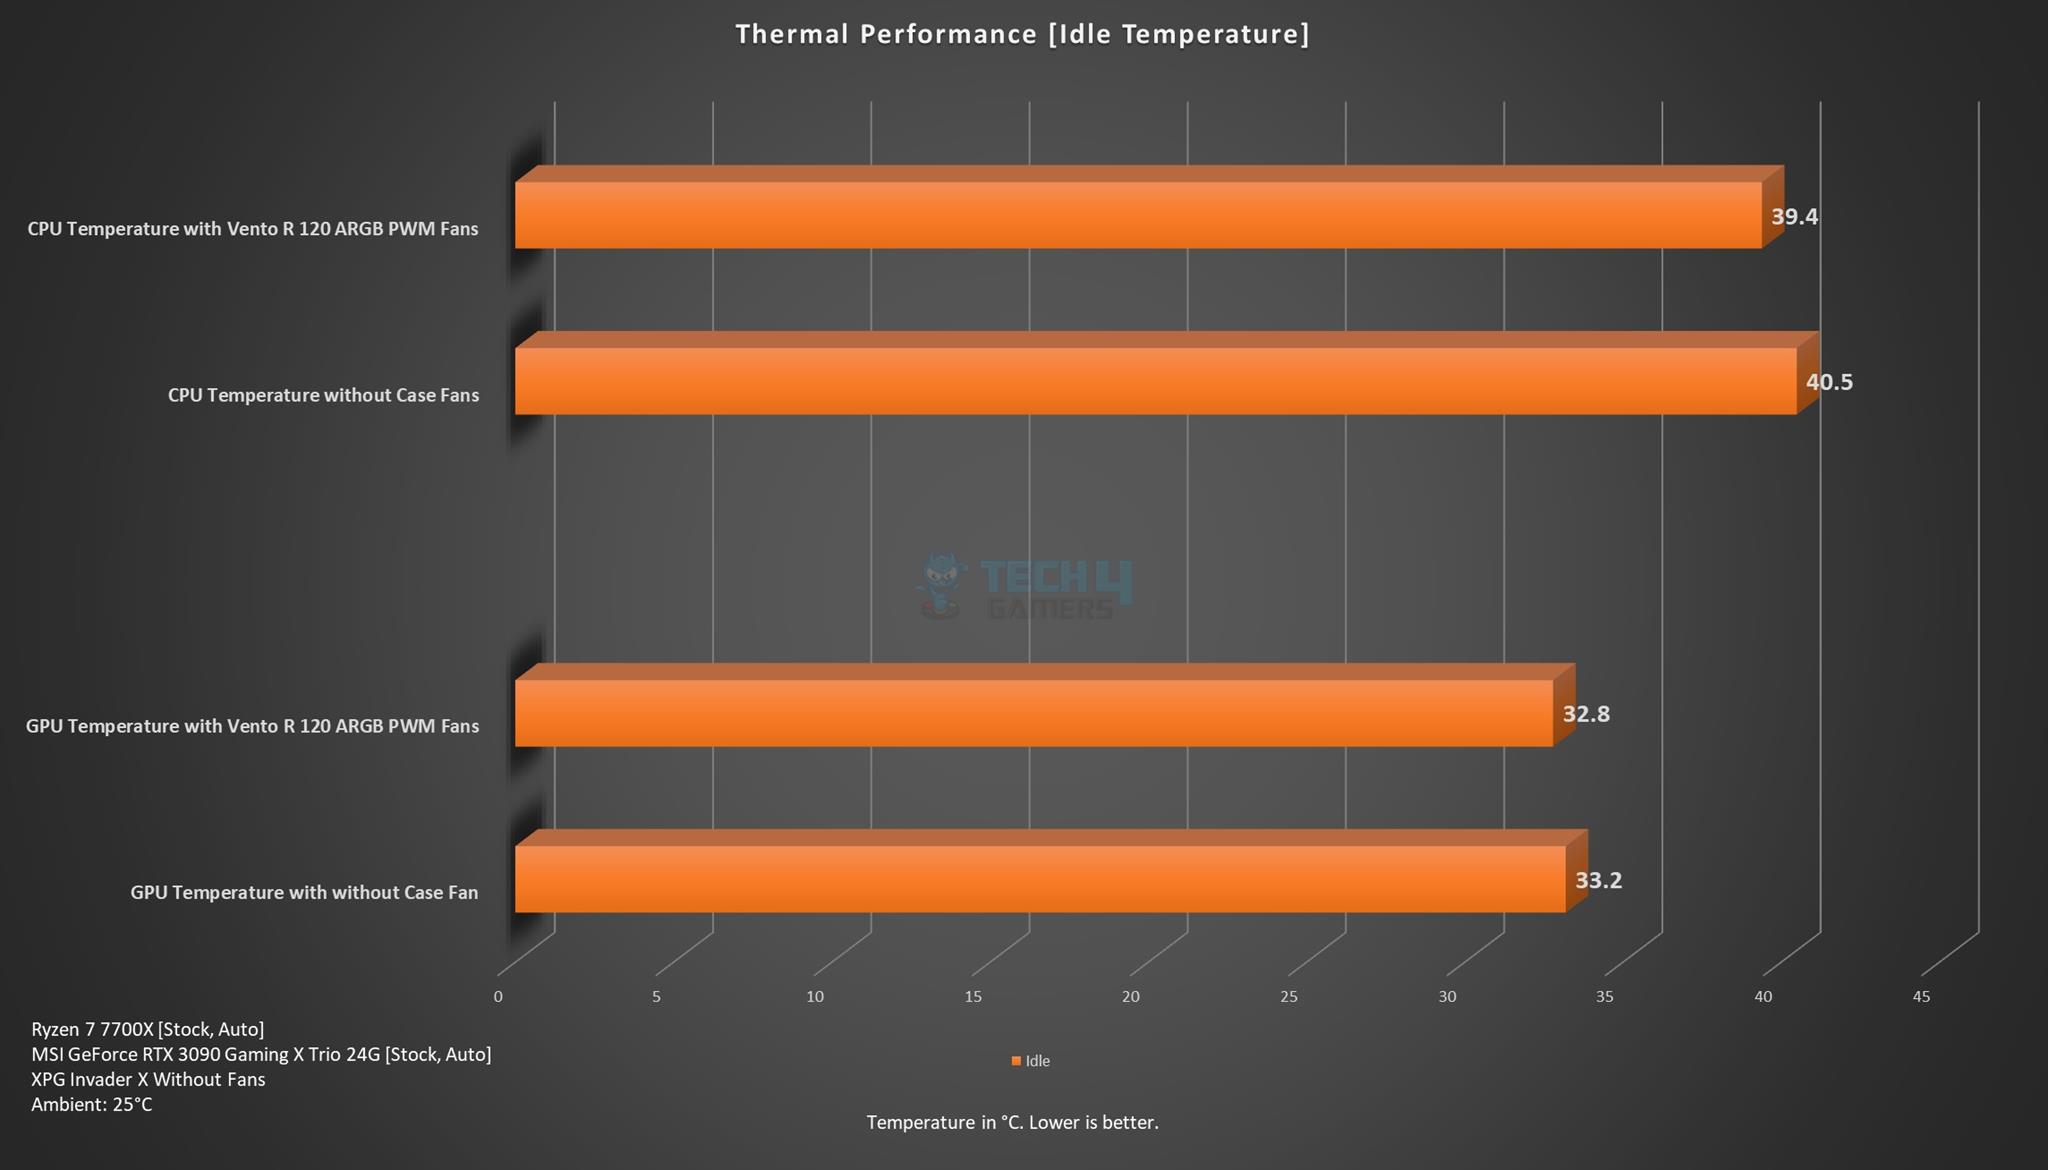 Idle Thermal Performance